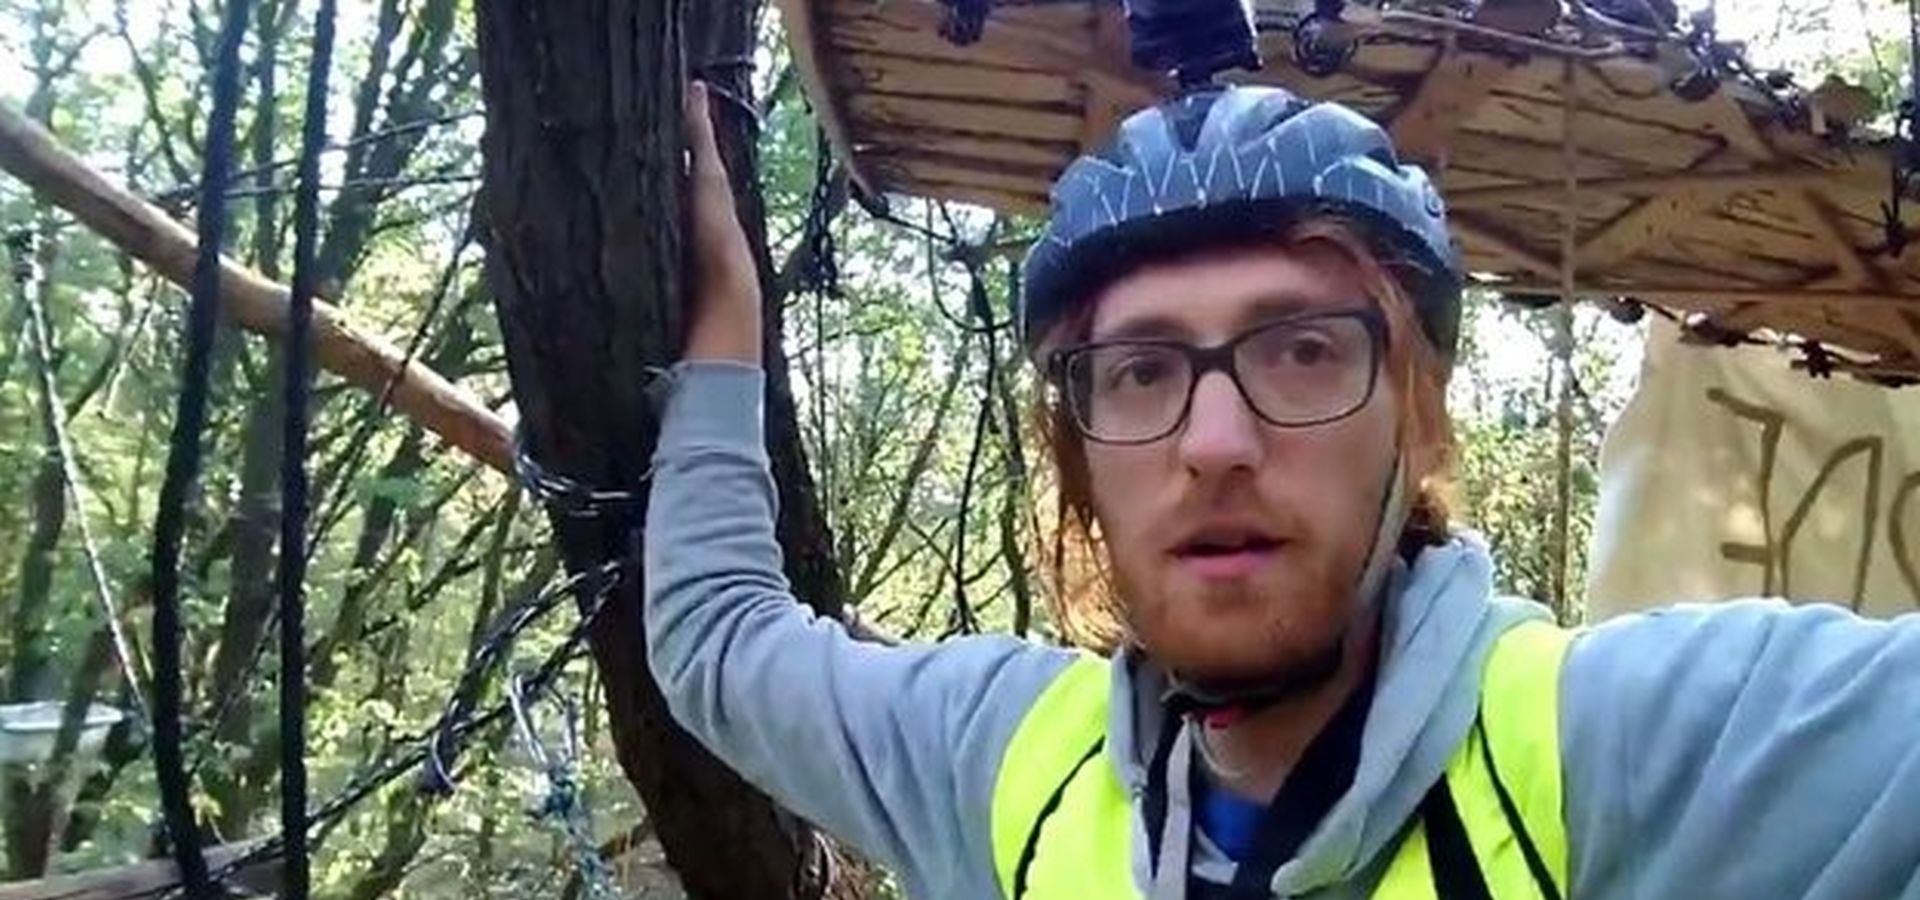 After the death of activist Steffen meyn the fight about Hambacher Forest continues